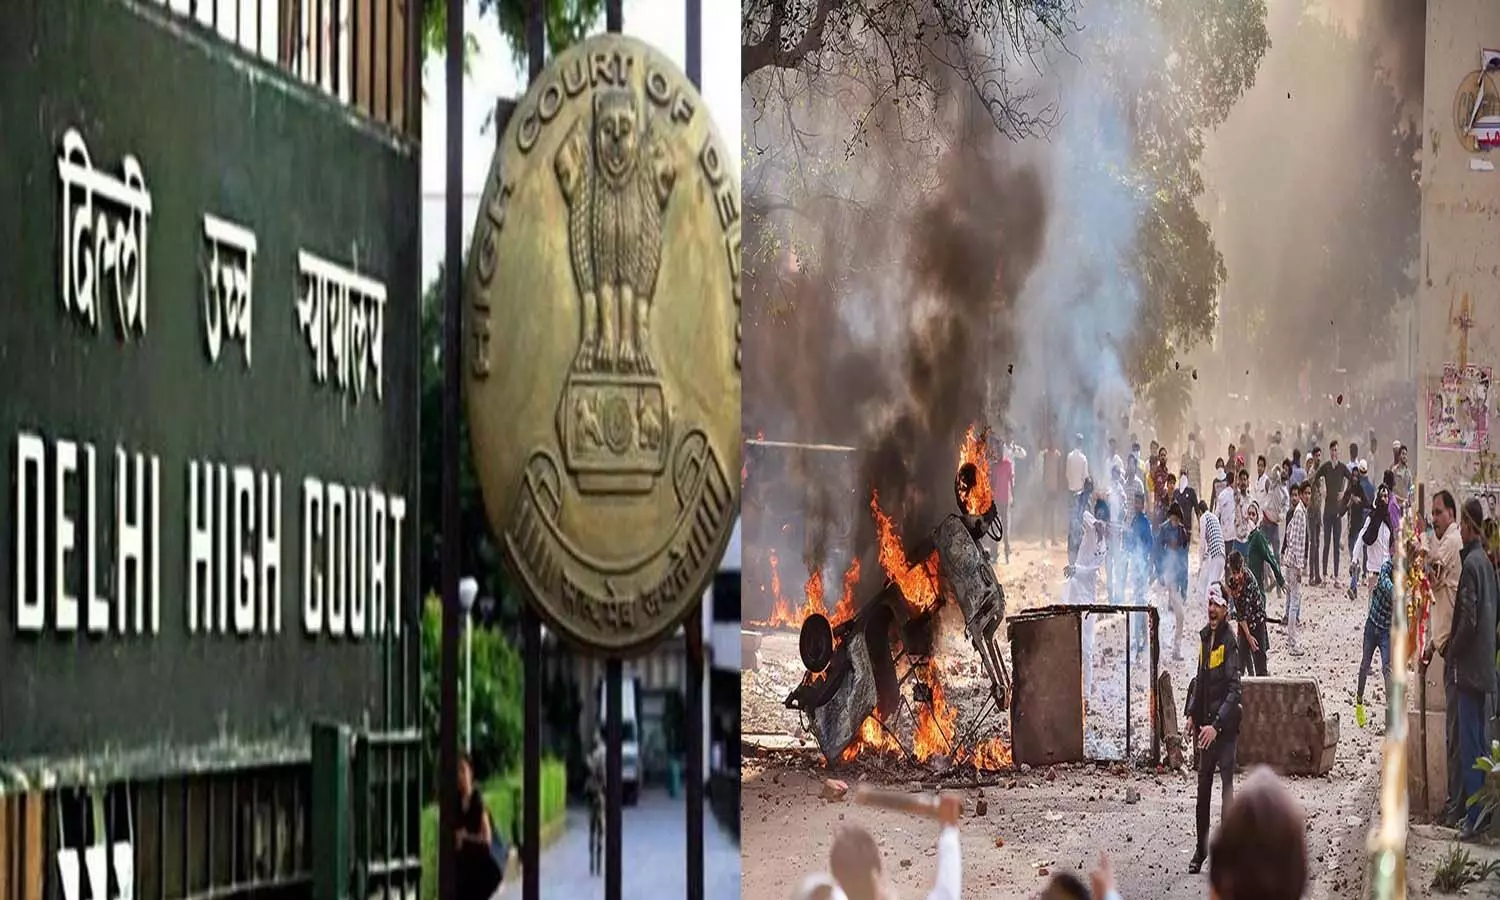 Delhi Riots: High court notice to these veteran leaders of the country regarding Delhi riots, asked why not prosecute you